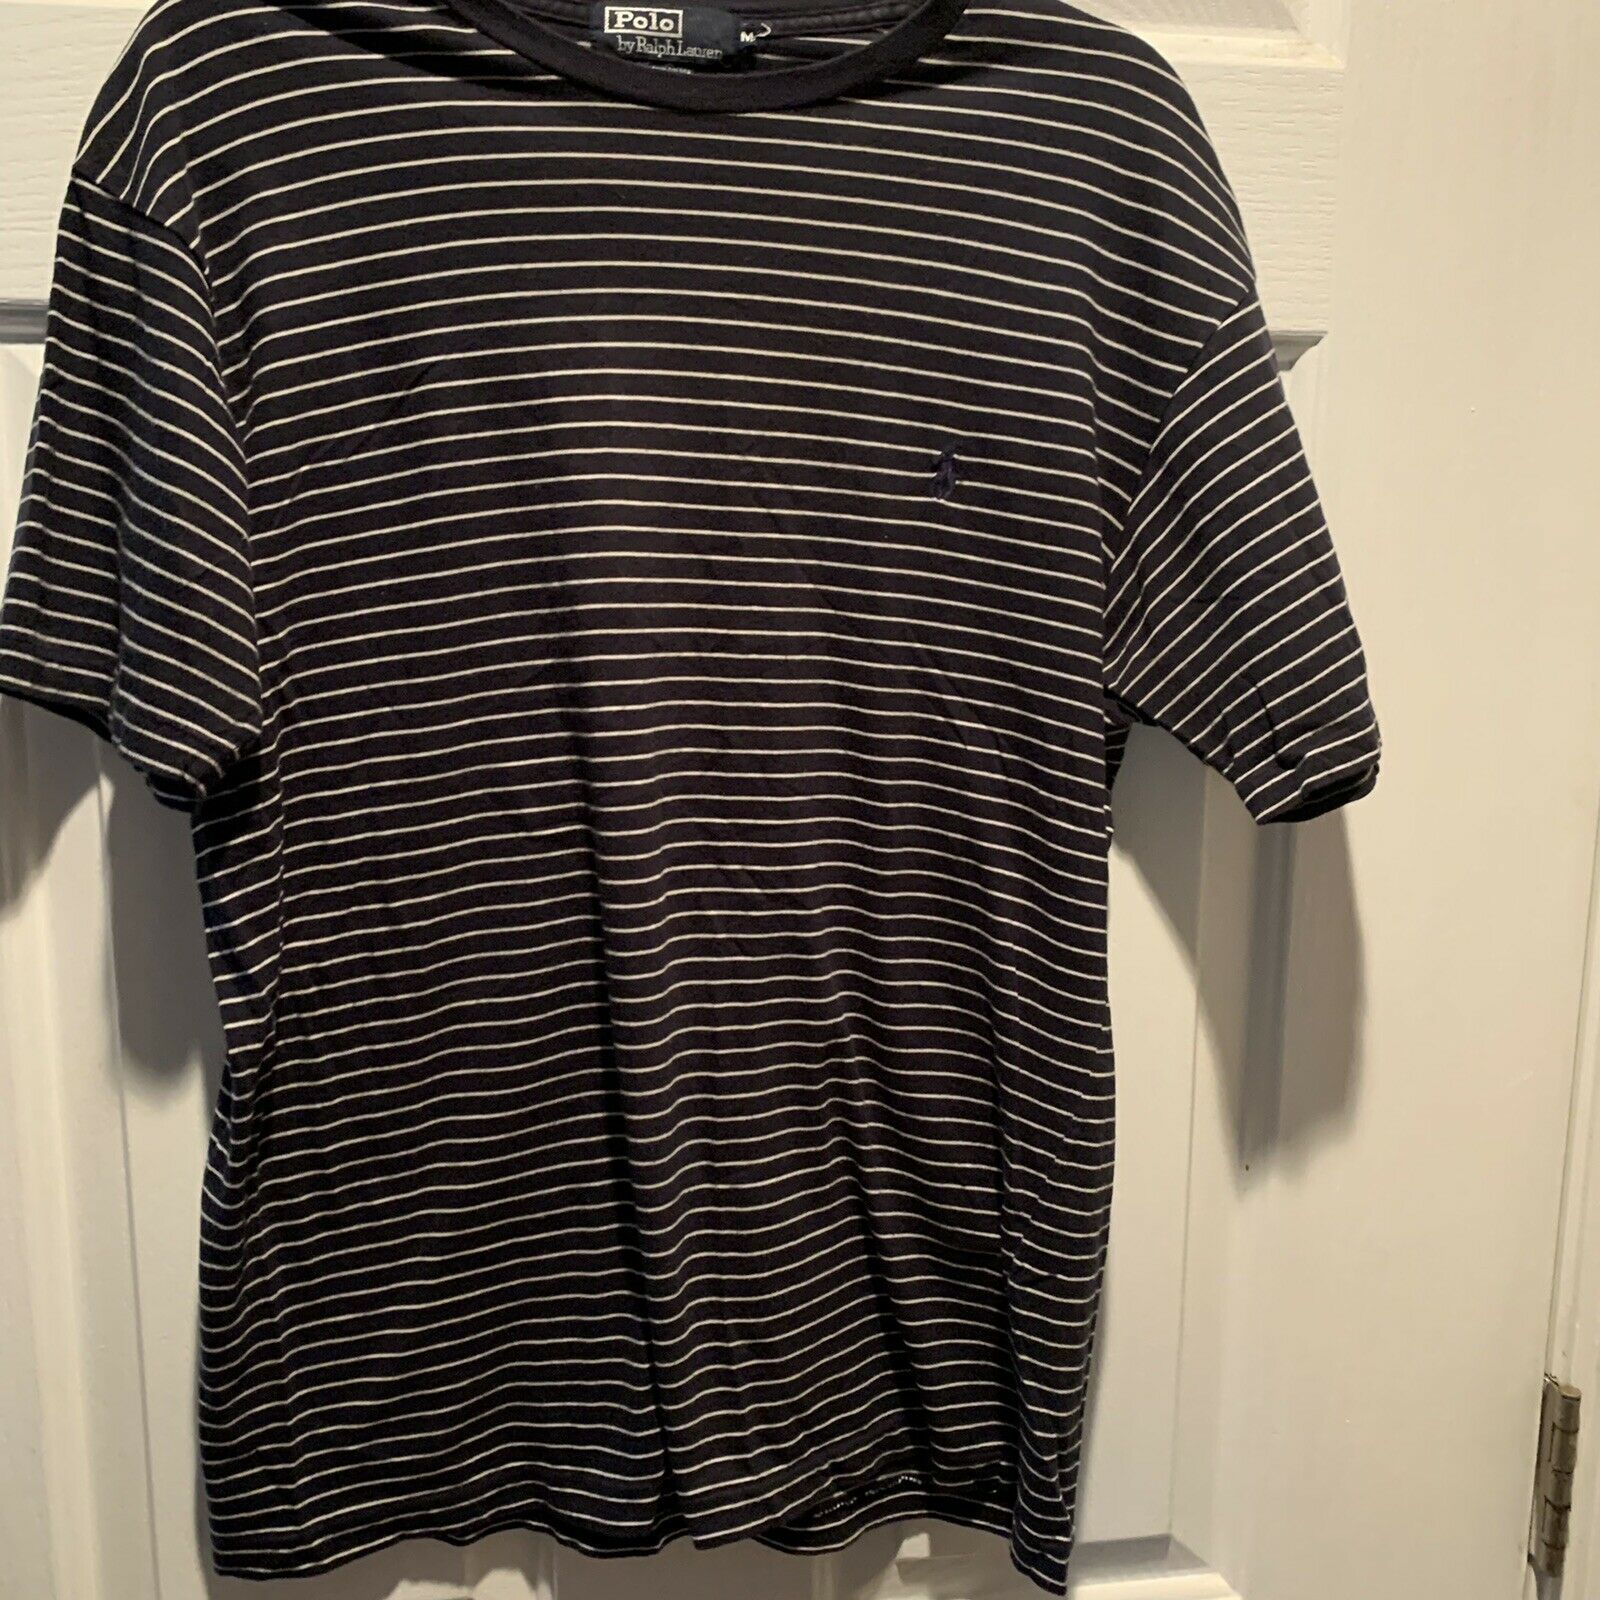 Primary image for Polo by Ralph Lauren Shirt with Stripes Short Sleeves, Medium.